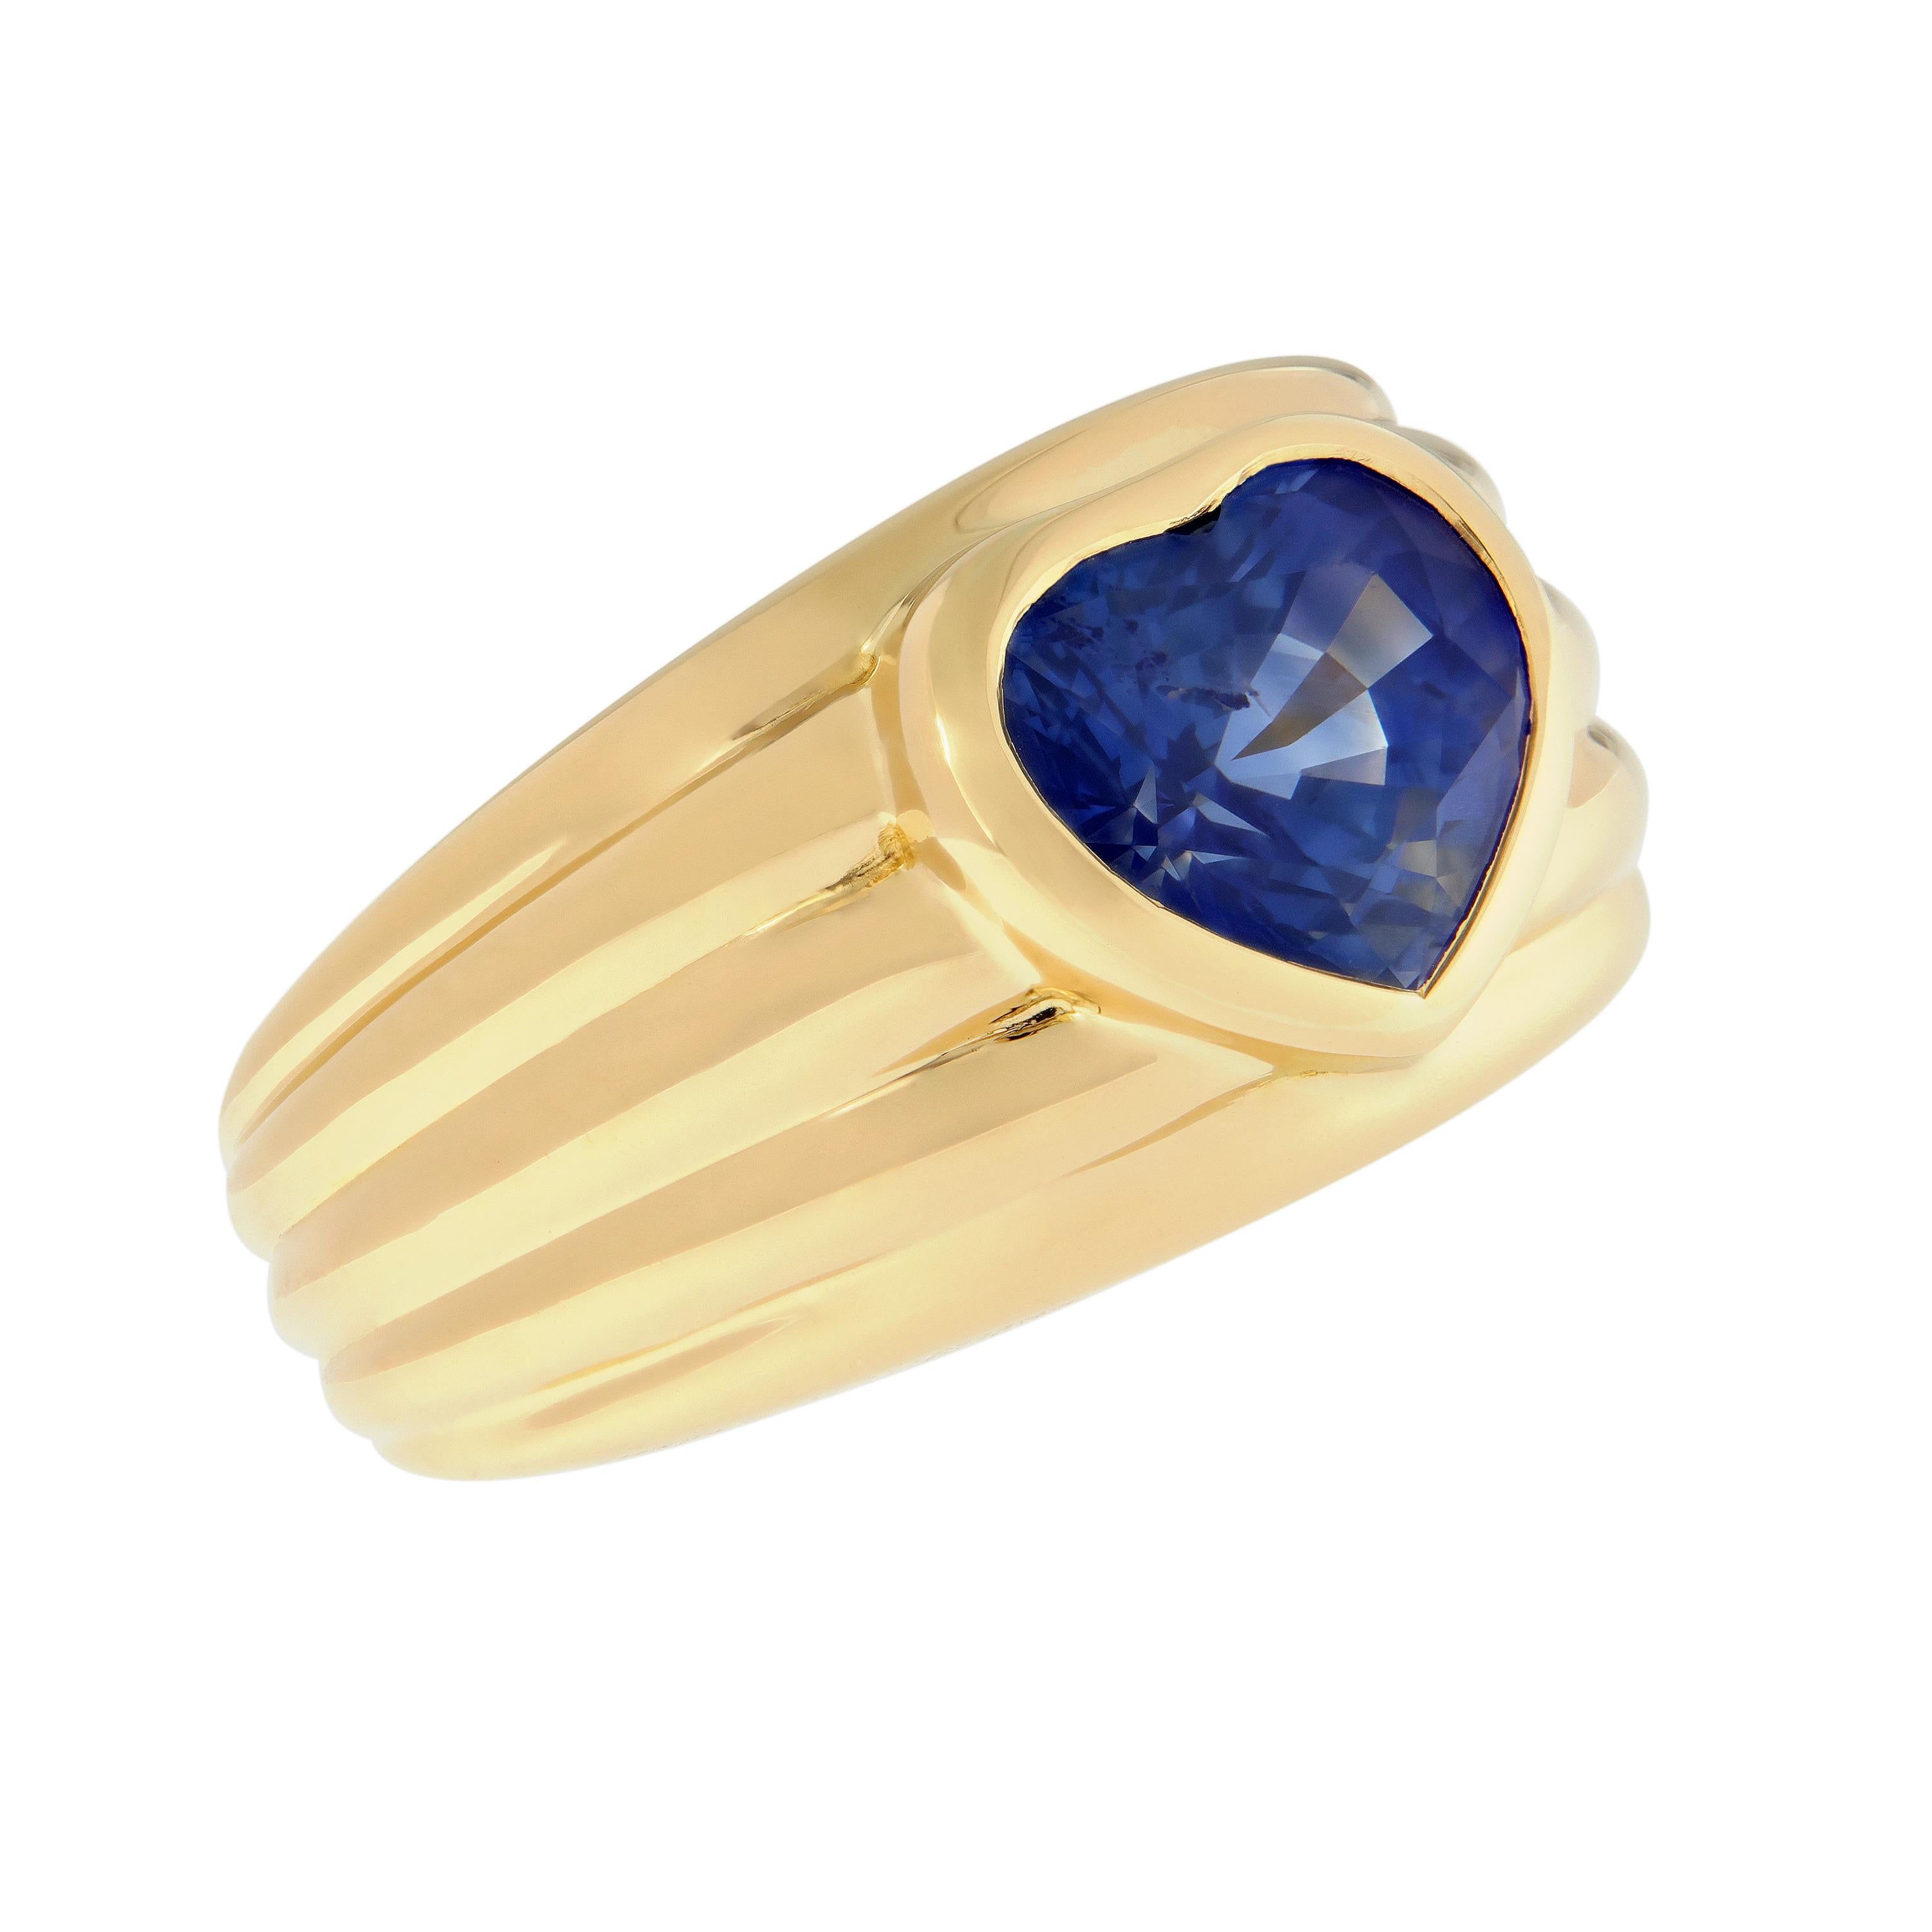 This ring features a bezel set heart-shaped blue sapphire center with ribbed grooves on the band adding to the charm of this 18k yellow gold band ring.  Perfect gift for Valentines Day, Mothers Day, Graduation, or just about any other occasion. Ring